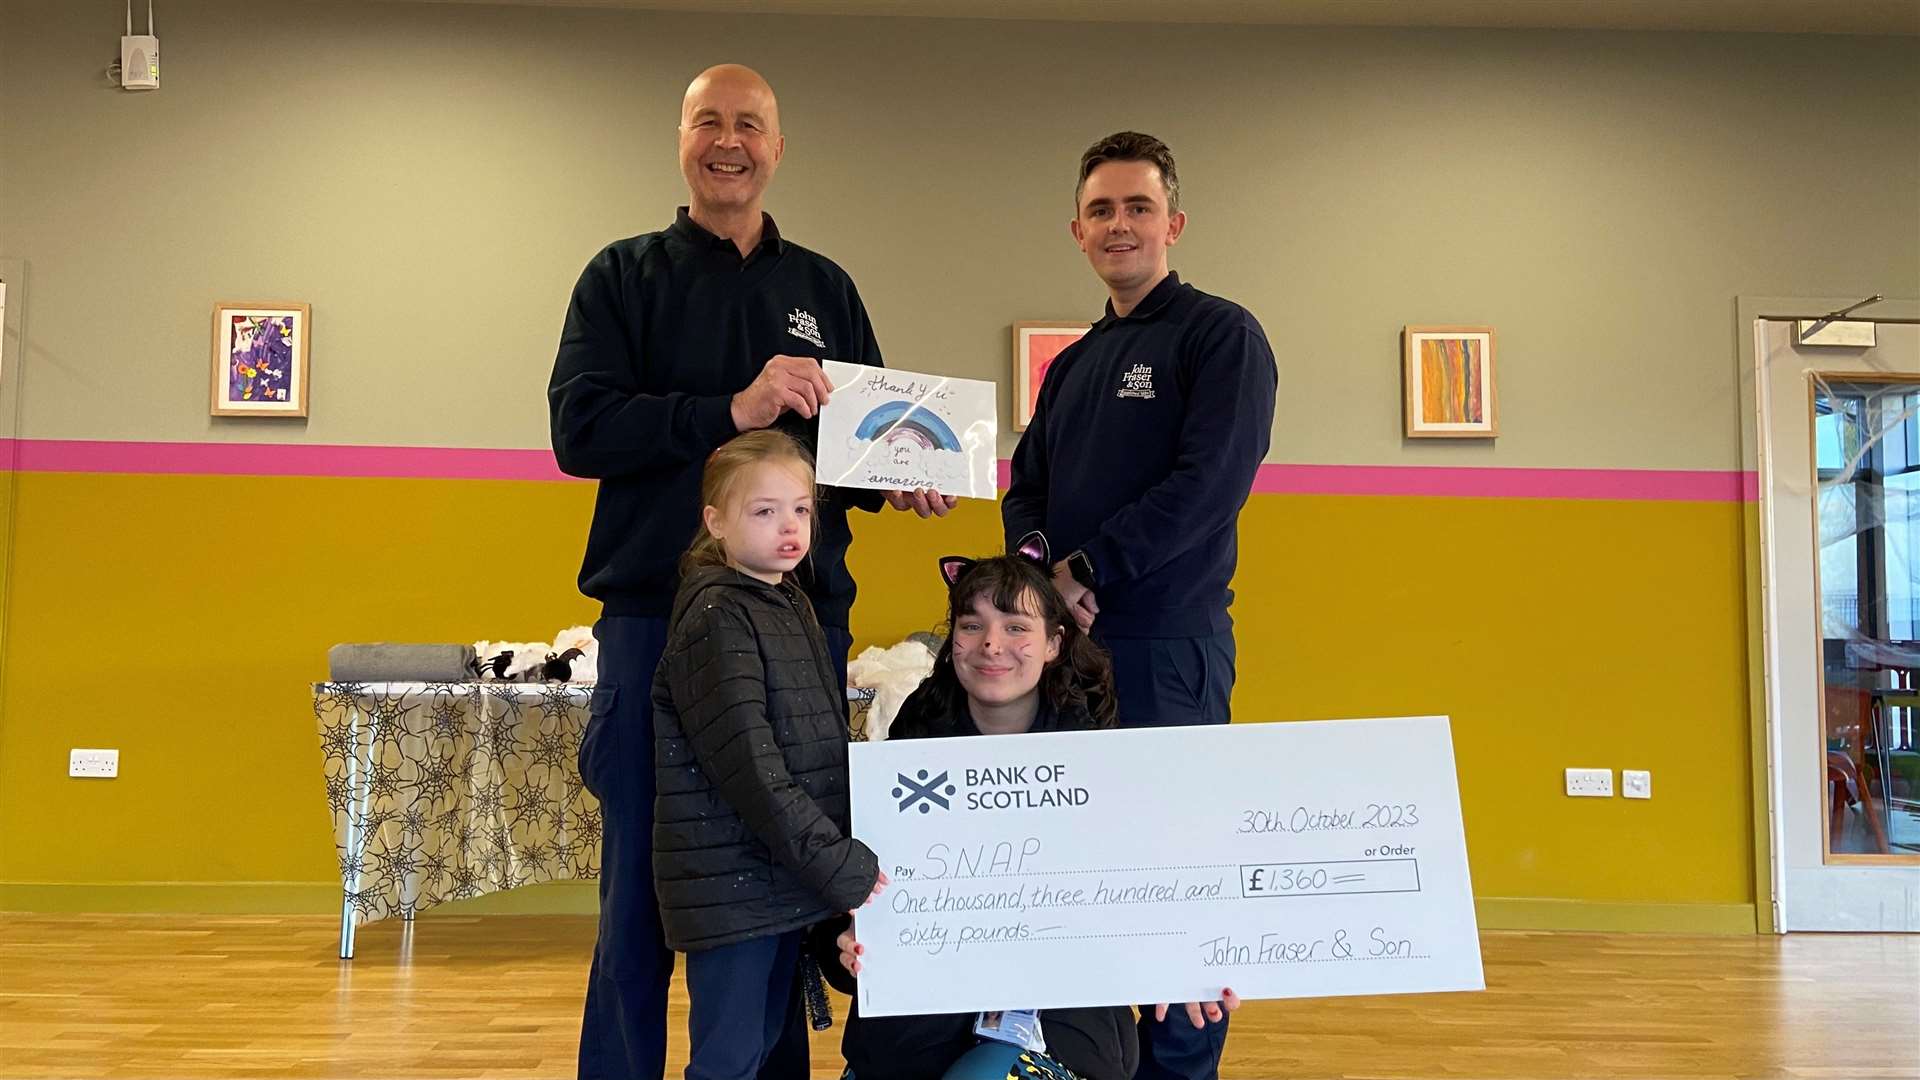 Memorial craftsman Drew Wheeler from John Fraser & Son (left) and trainee funeral director James Thompson, visit SNAP at The Haven Centre to hand over a fundraising cheque for £1360 to staff member Anya McPhee and one of the wee ones who was enjoying a play session in the charity’s new premises.